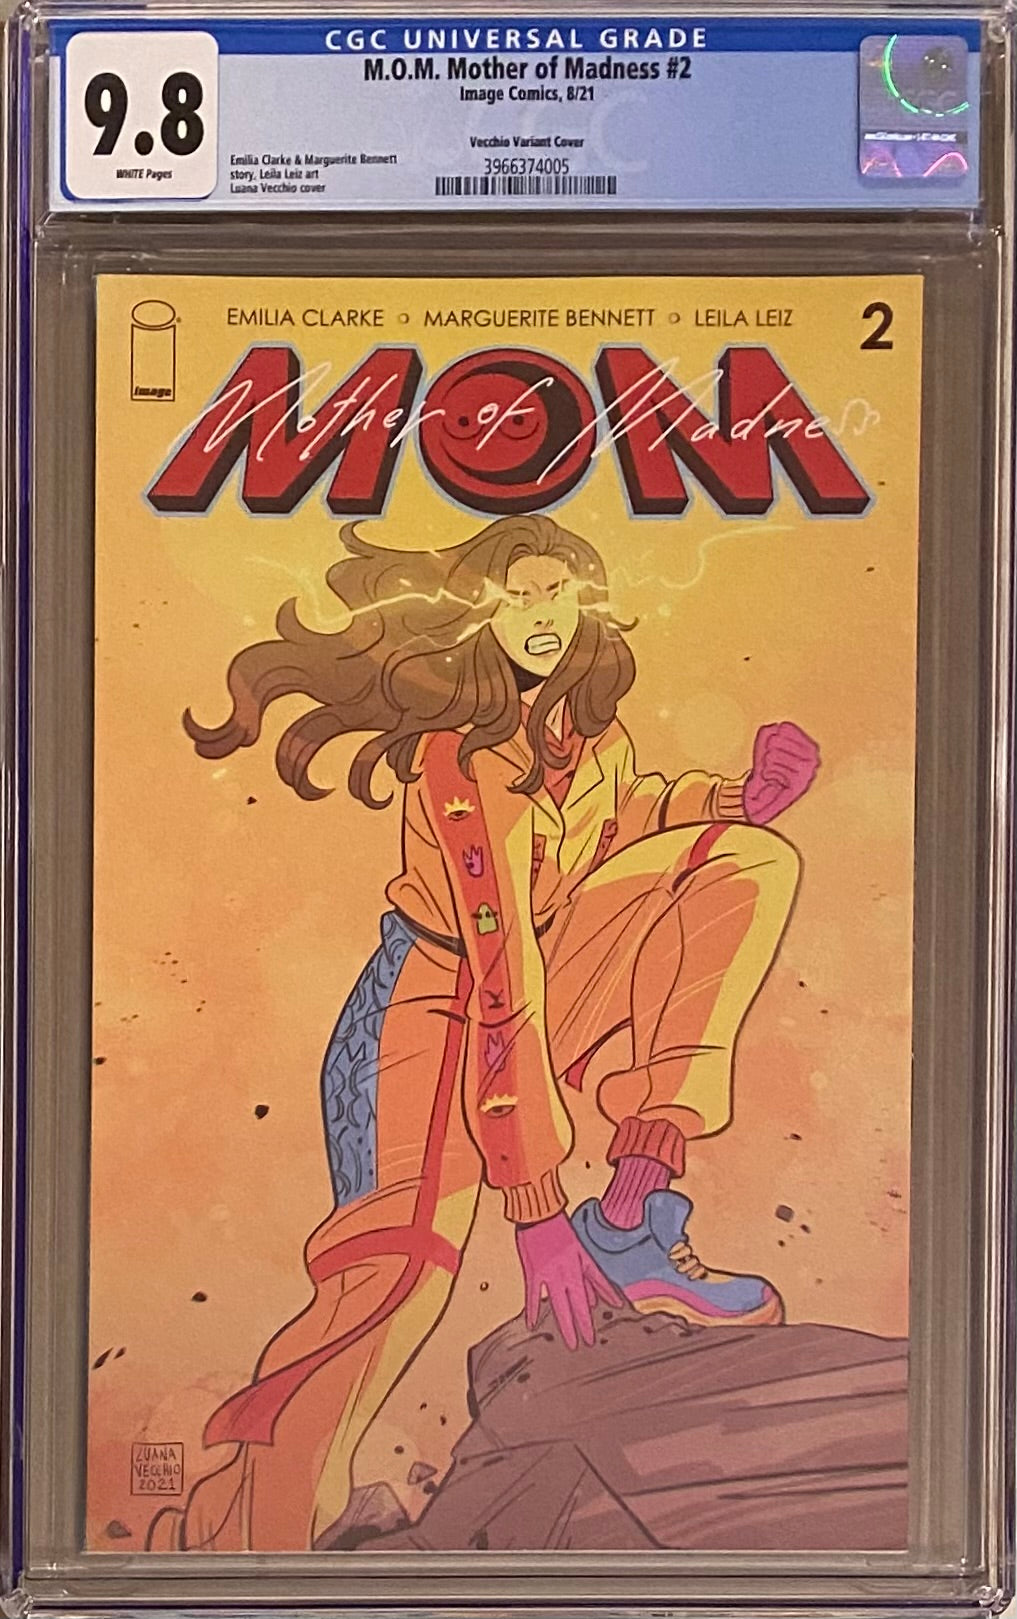 MOM Mother of Madness #2 Vecchio 1:10 Retailer Incentive Variant CGC 9.8